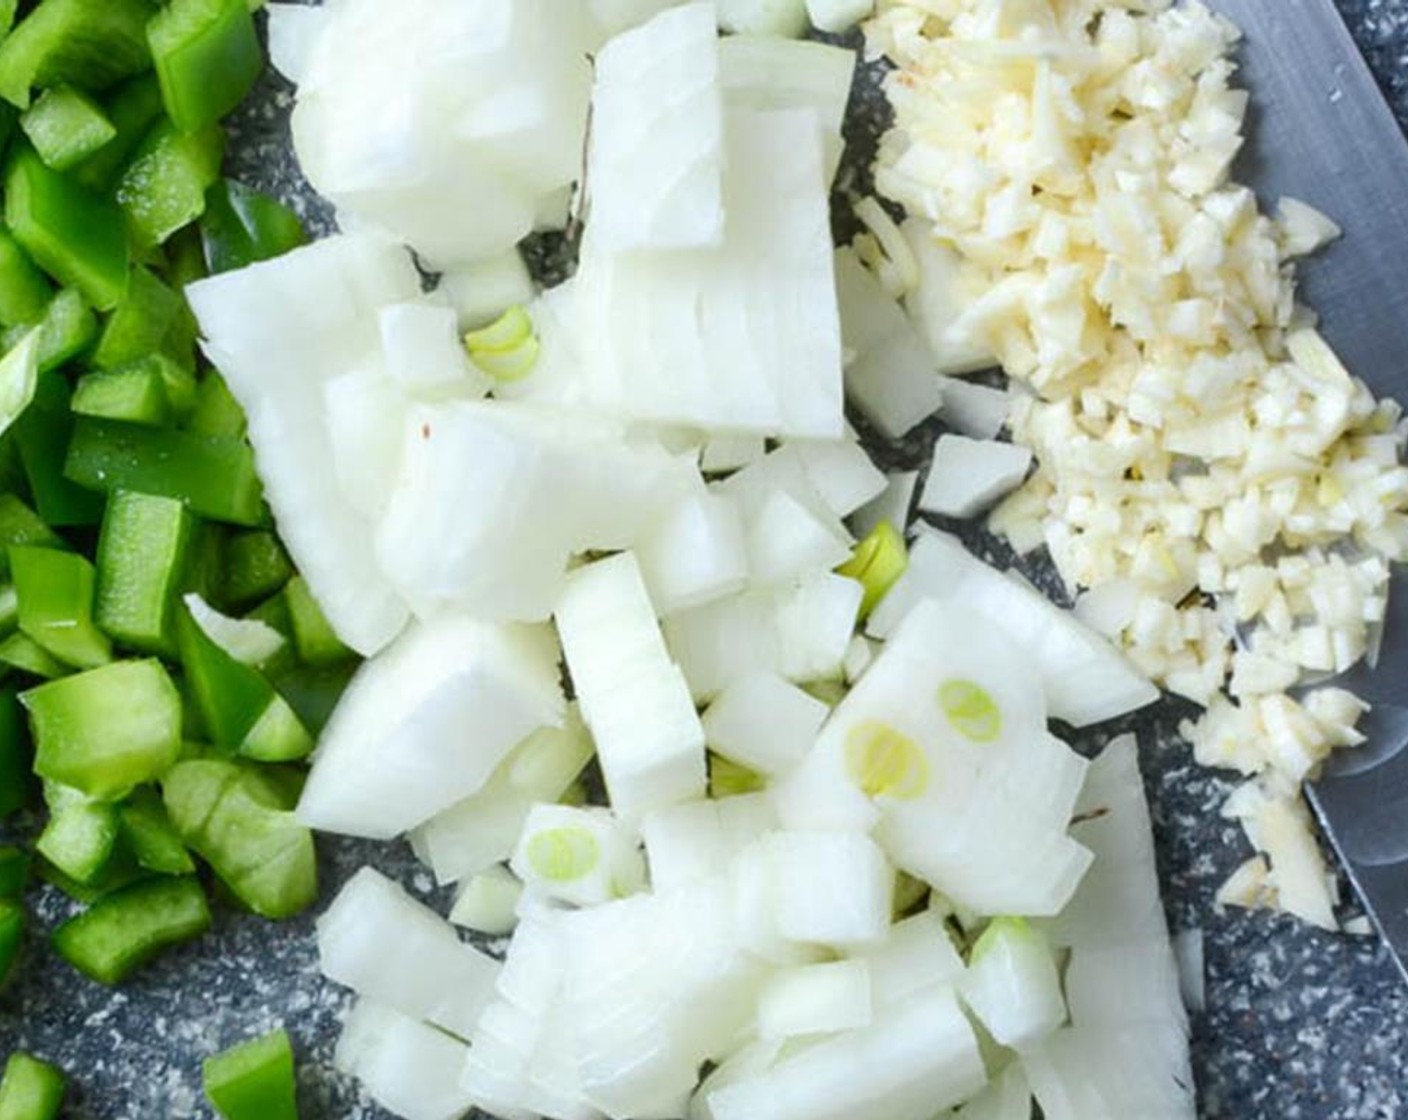 step 5 Add the  diced Green Bell Pepper (1 cup), minced Garlic (1 clove) and diced Onion (1 cup) and and cook, stirring several times, until the vegetables are tender and slightly translucent, about 5 minutes.